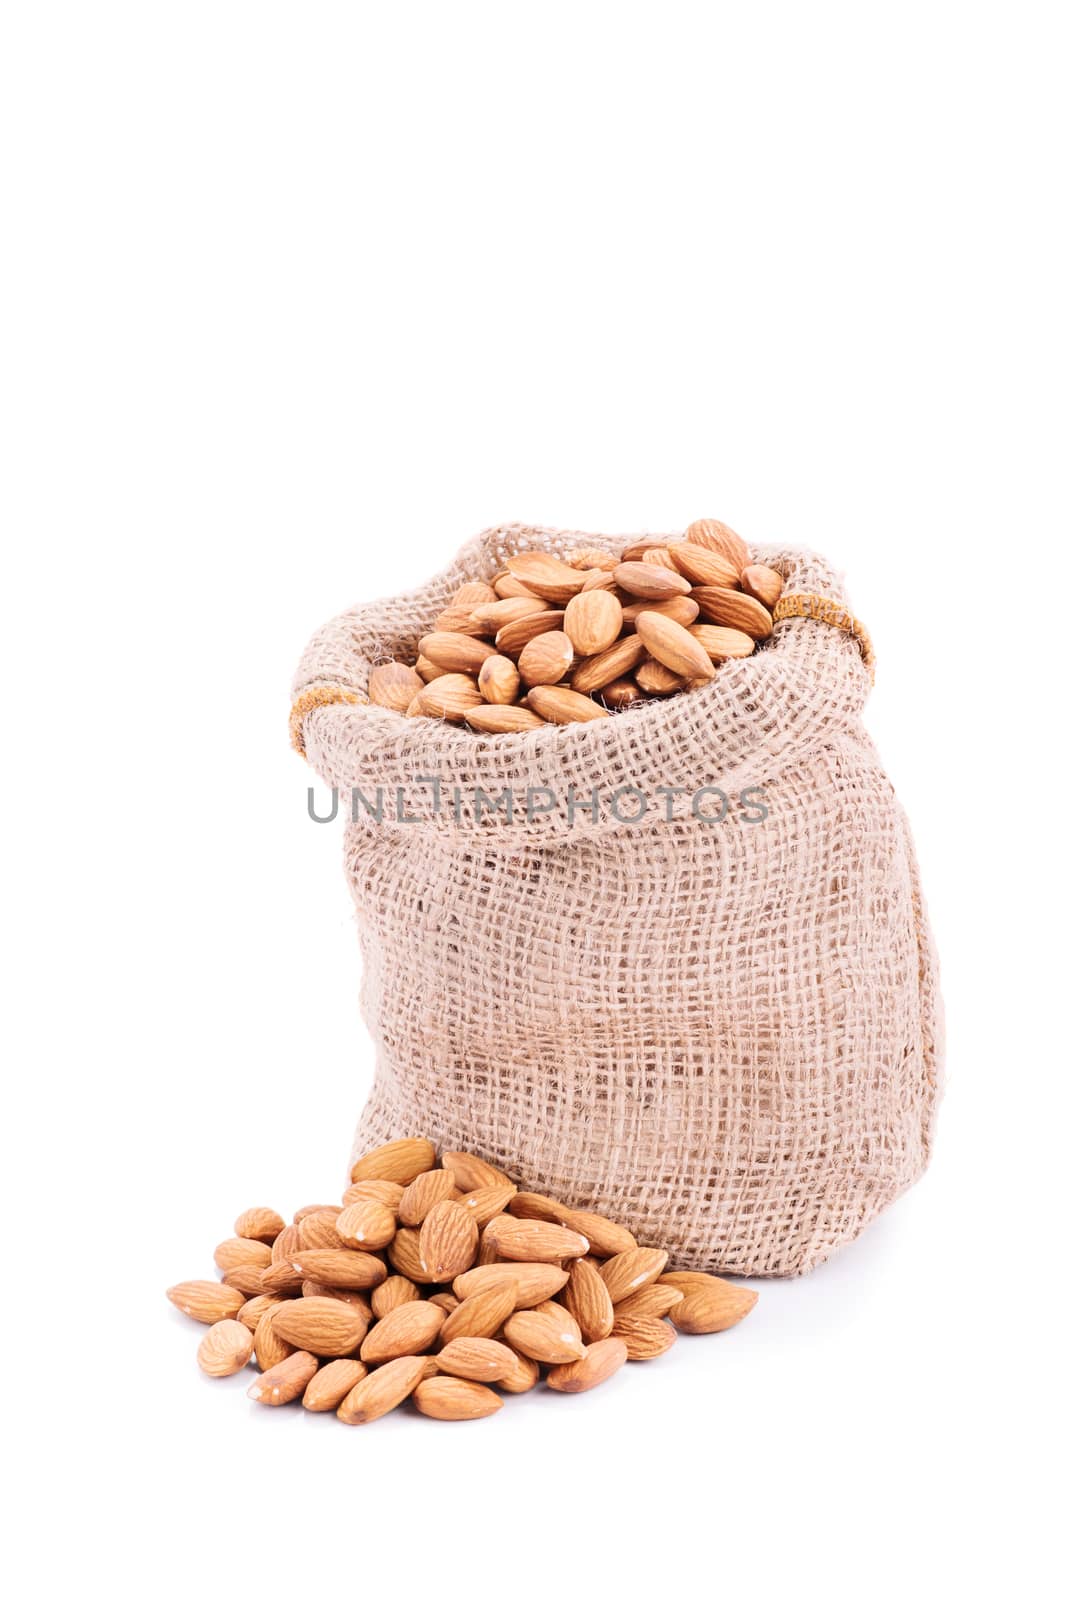 Close up shot of a small burlap sack of fresh almonds, isolated on white background.